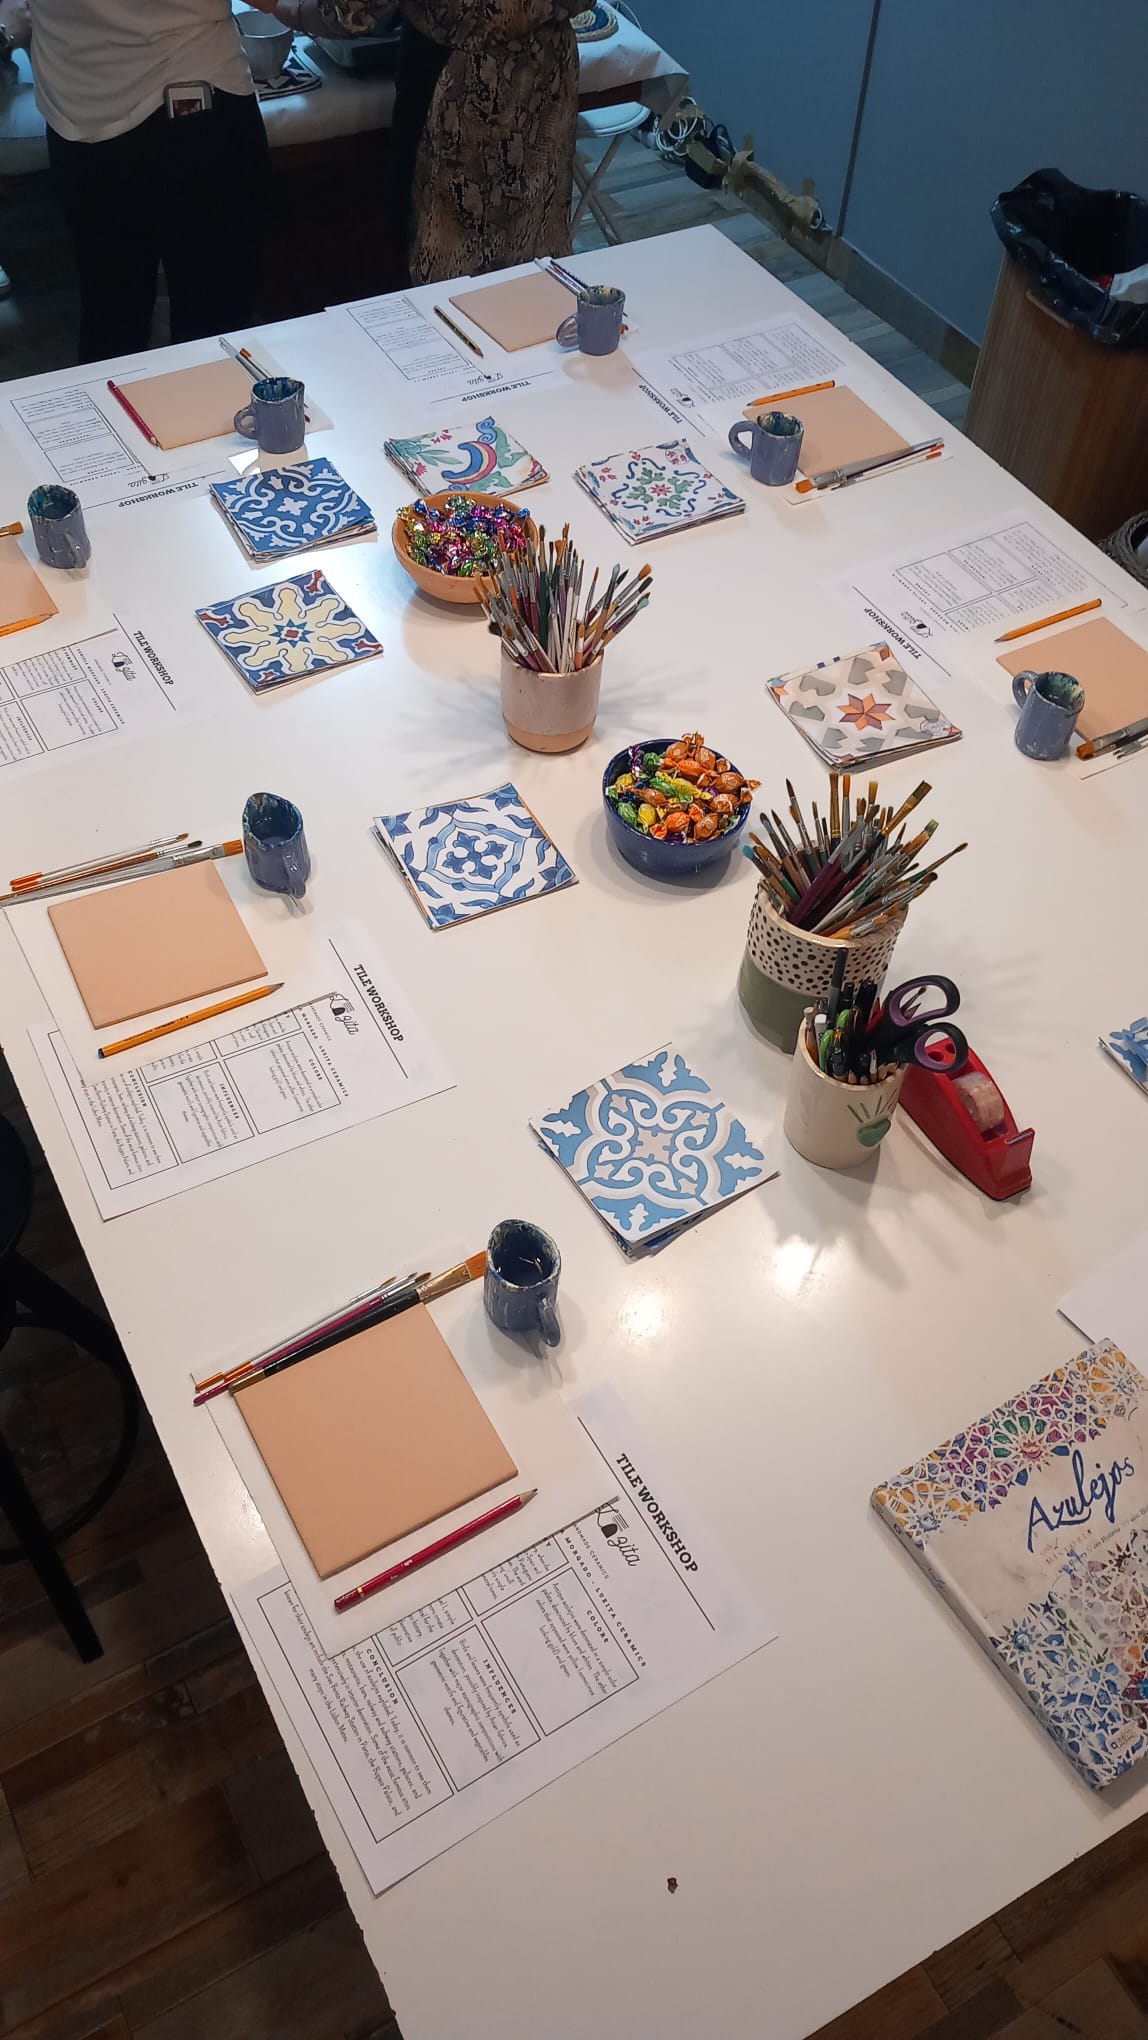 Tile Painting Workshop with Daniela in Porto, Portugal